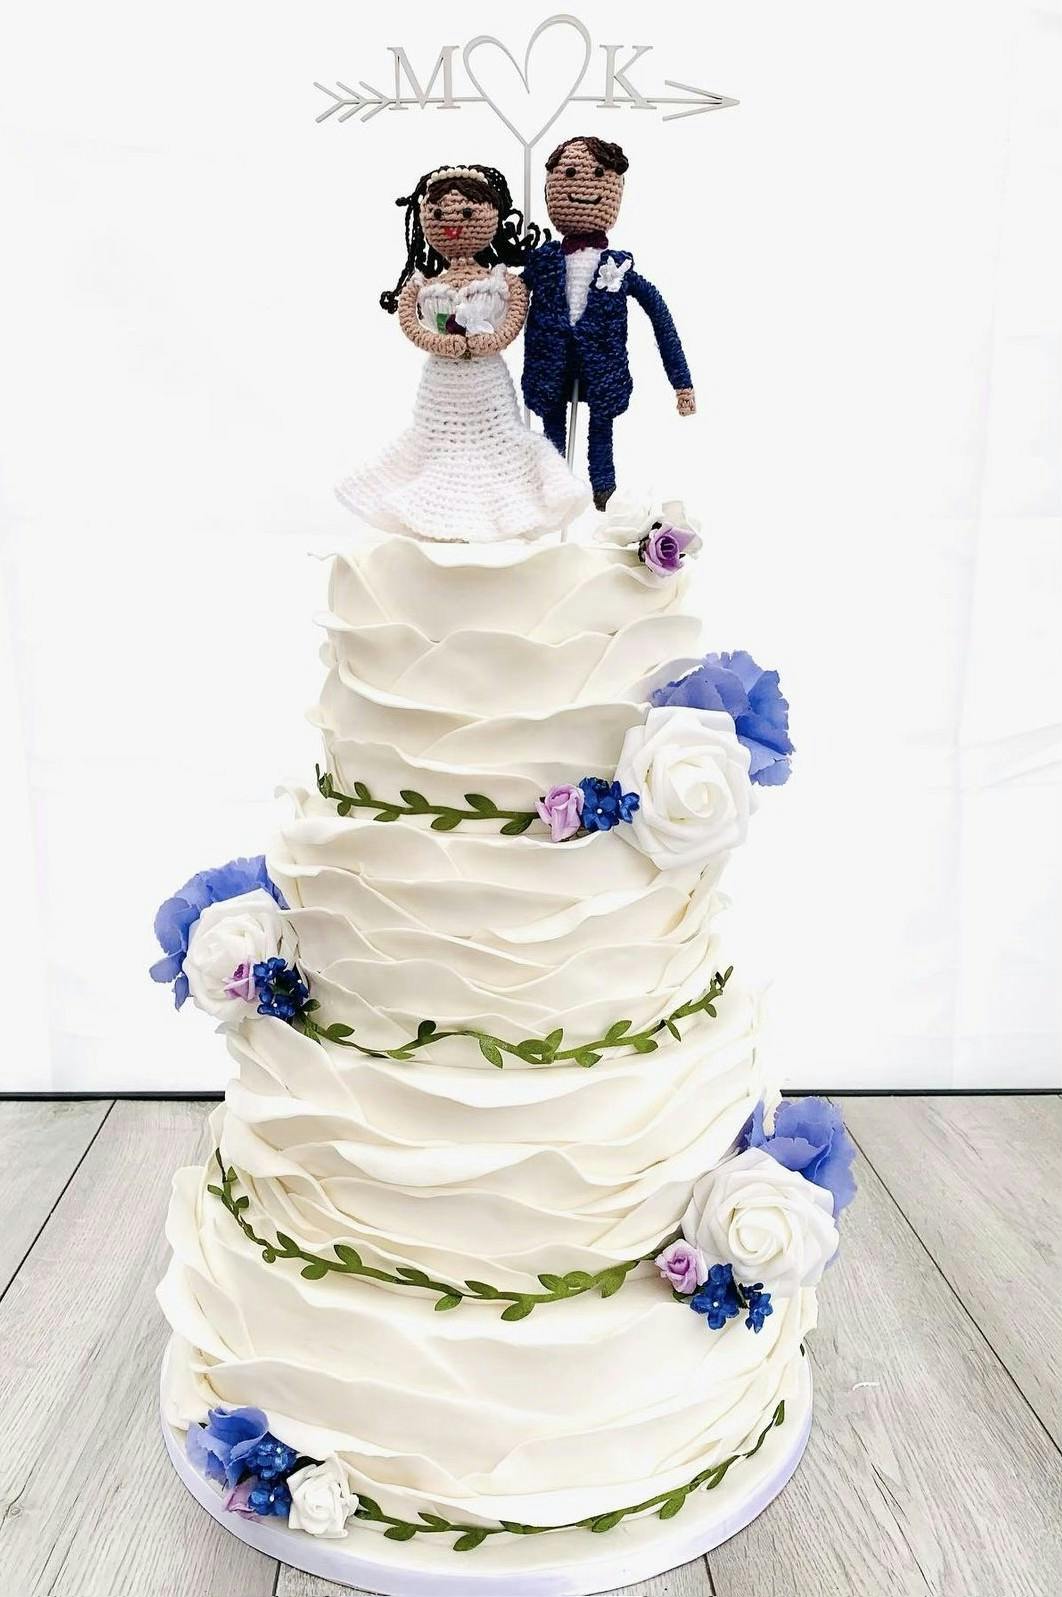 White wedding cake with white flowers, blue flowers, wavy icing patterns and knitted figures on top